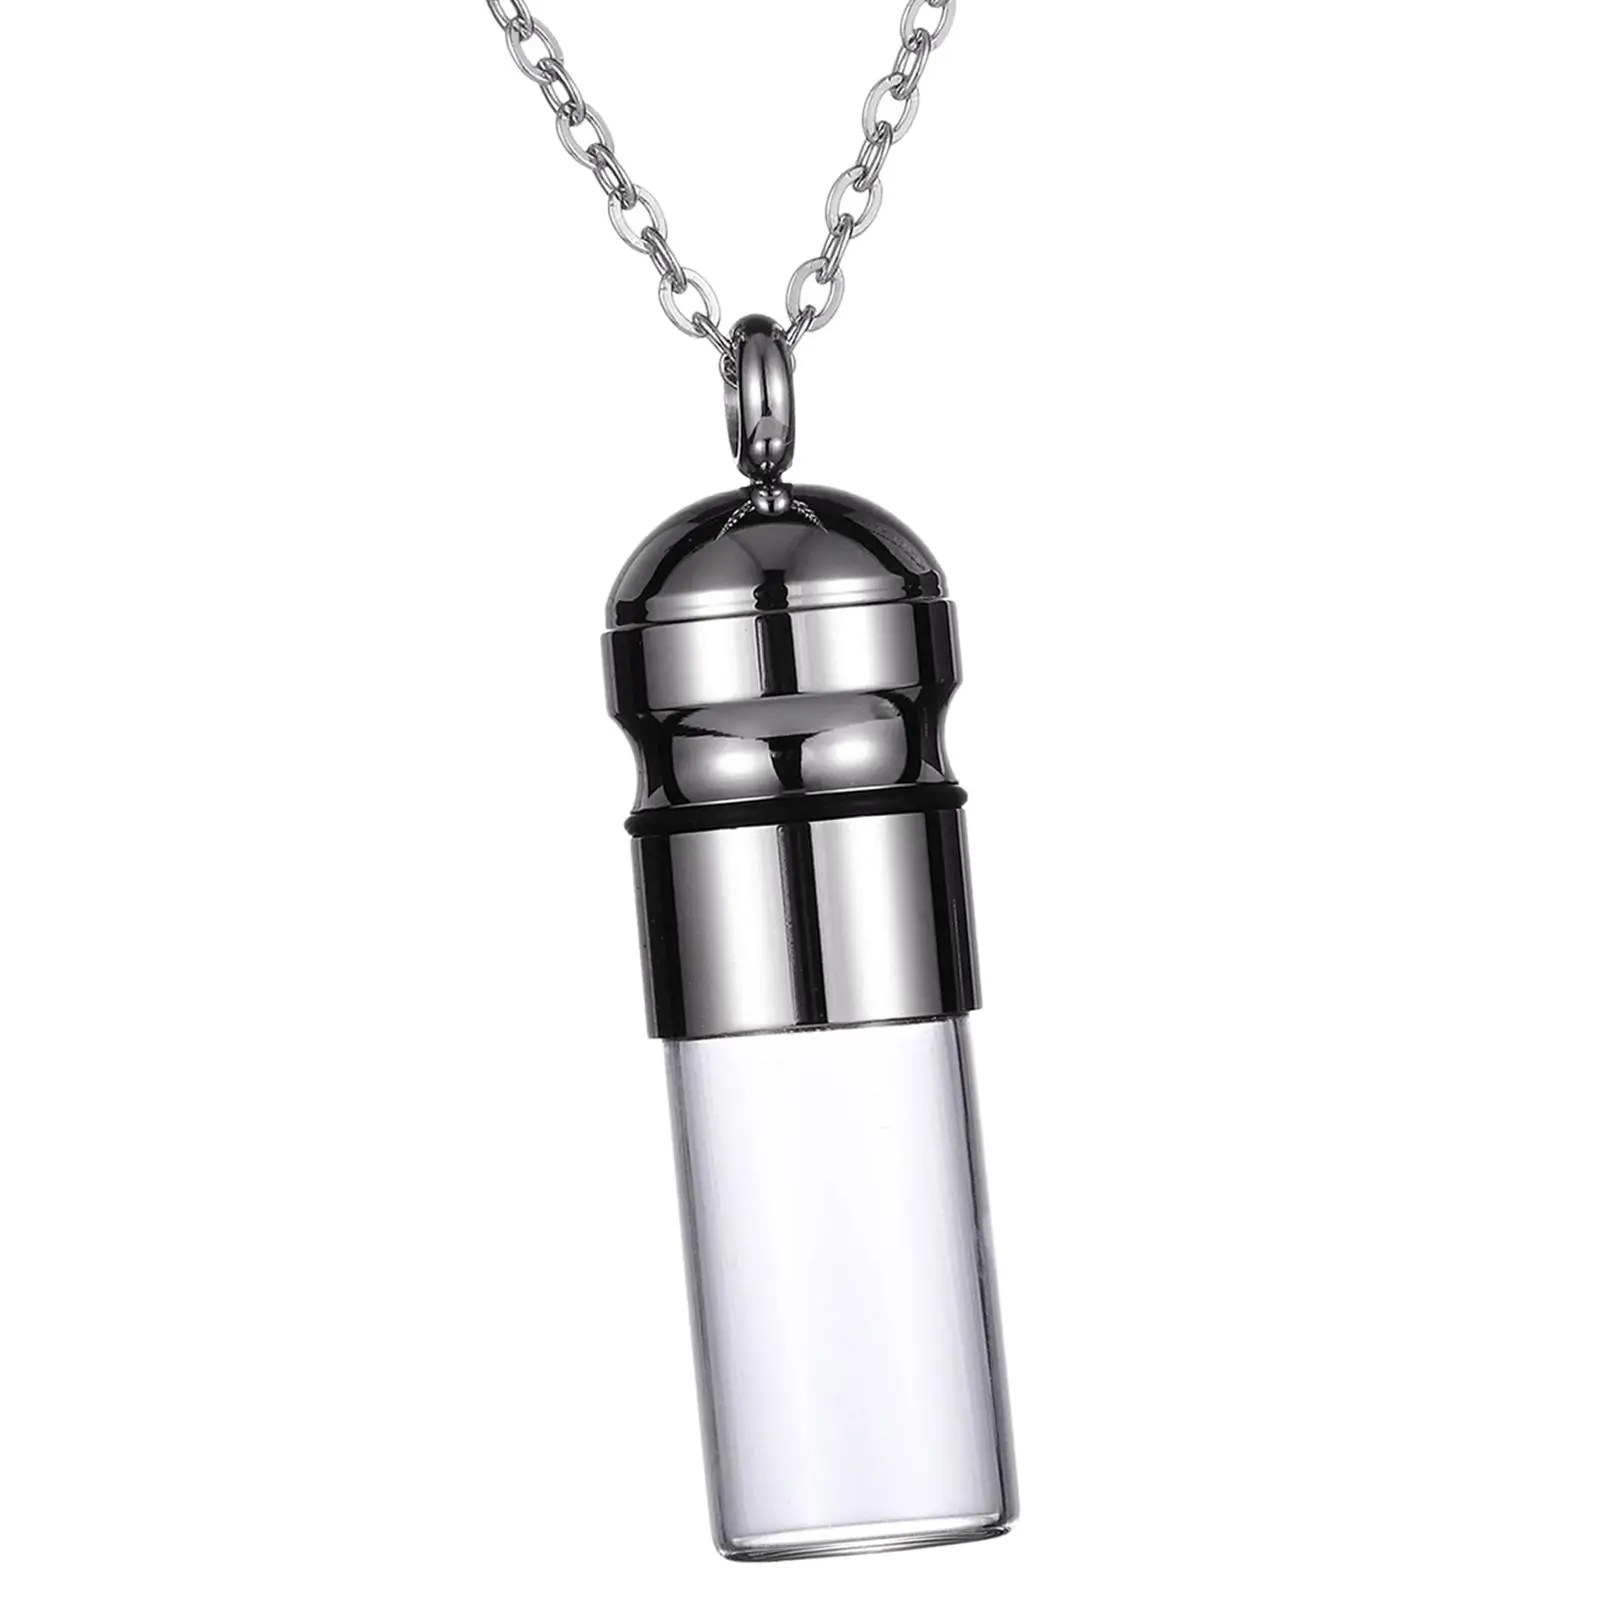 Clear Pendant Cremation Urn Necklace Perfume Holder Openable Pet Ashes Holder Jewelry Memorial Pendant for Dog Cat Friends